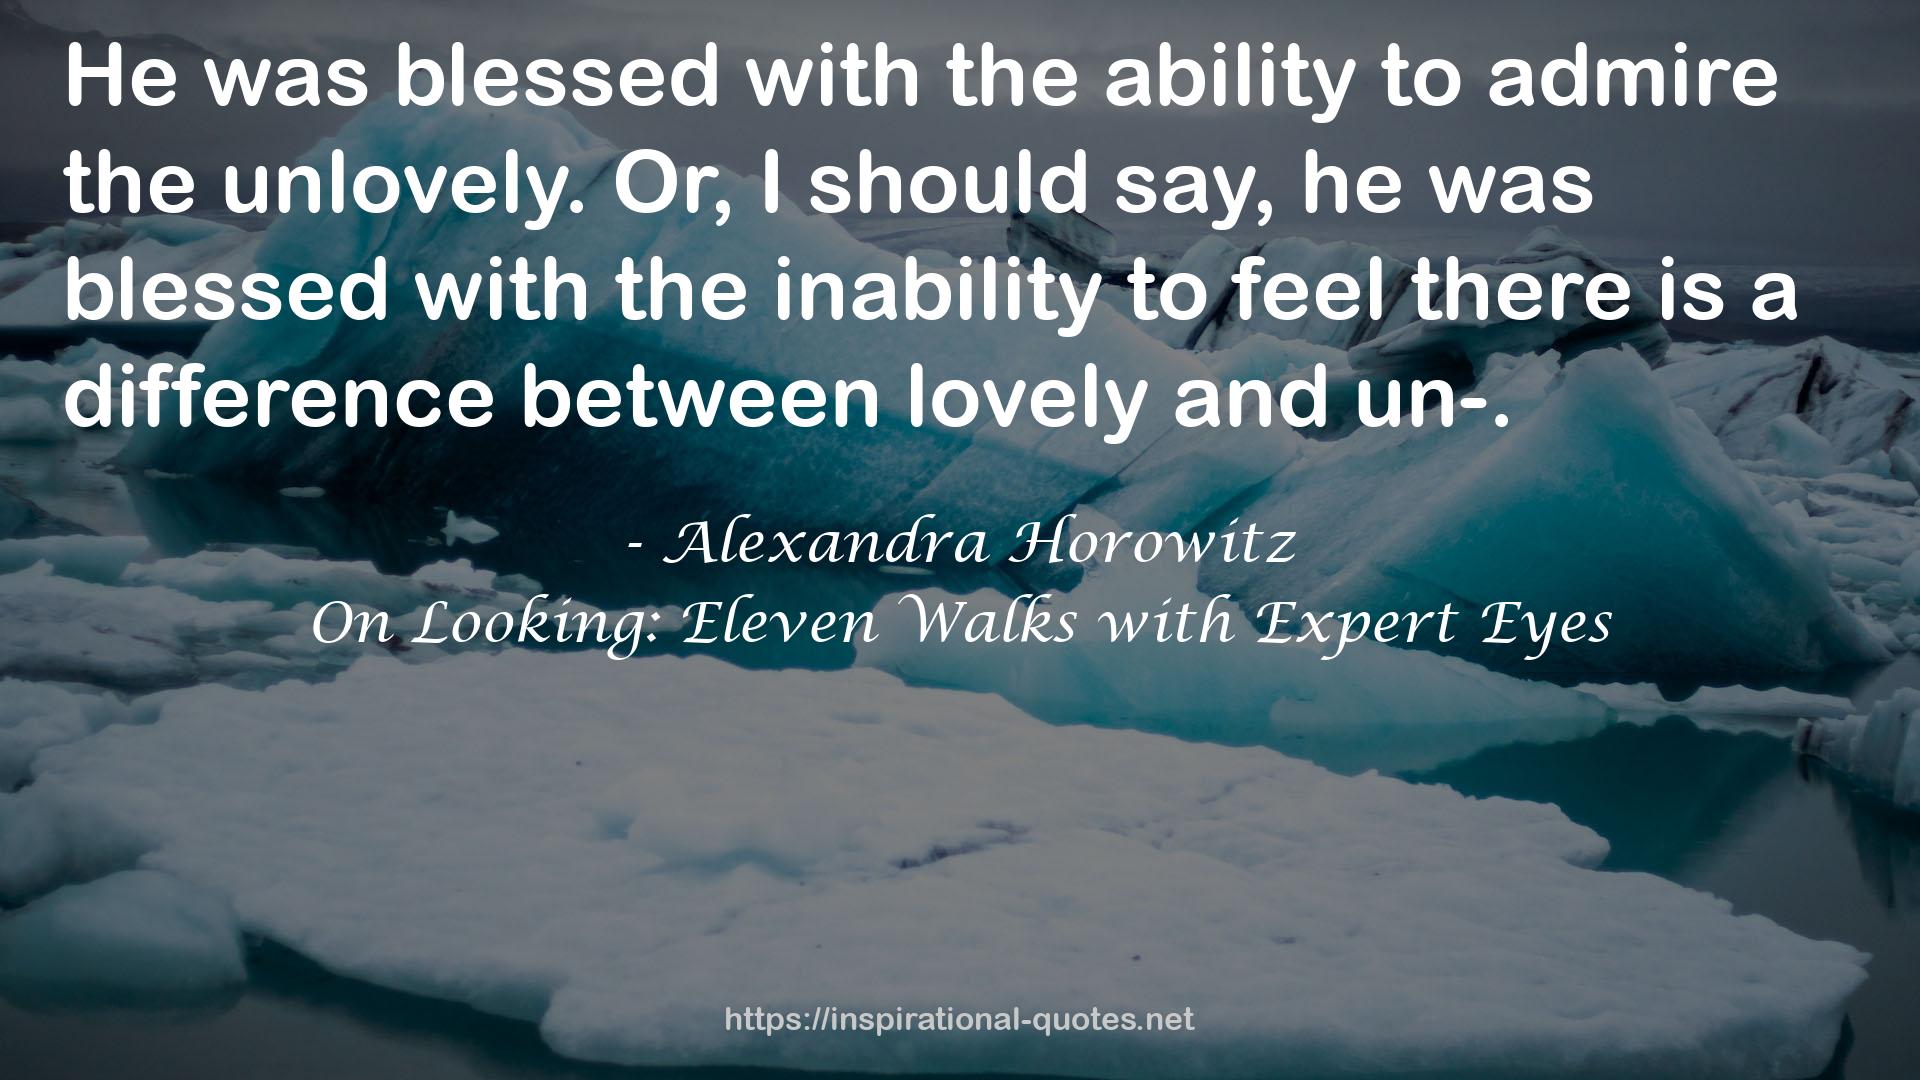 On Looking: Eleven Walks with Expert Eyes QUOTES